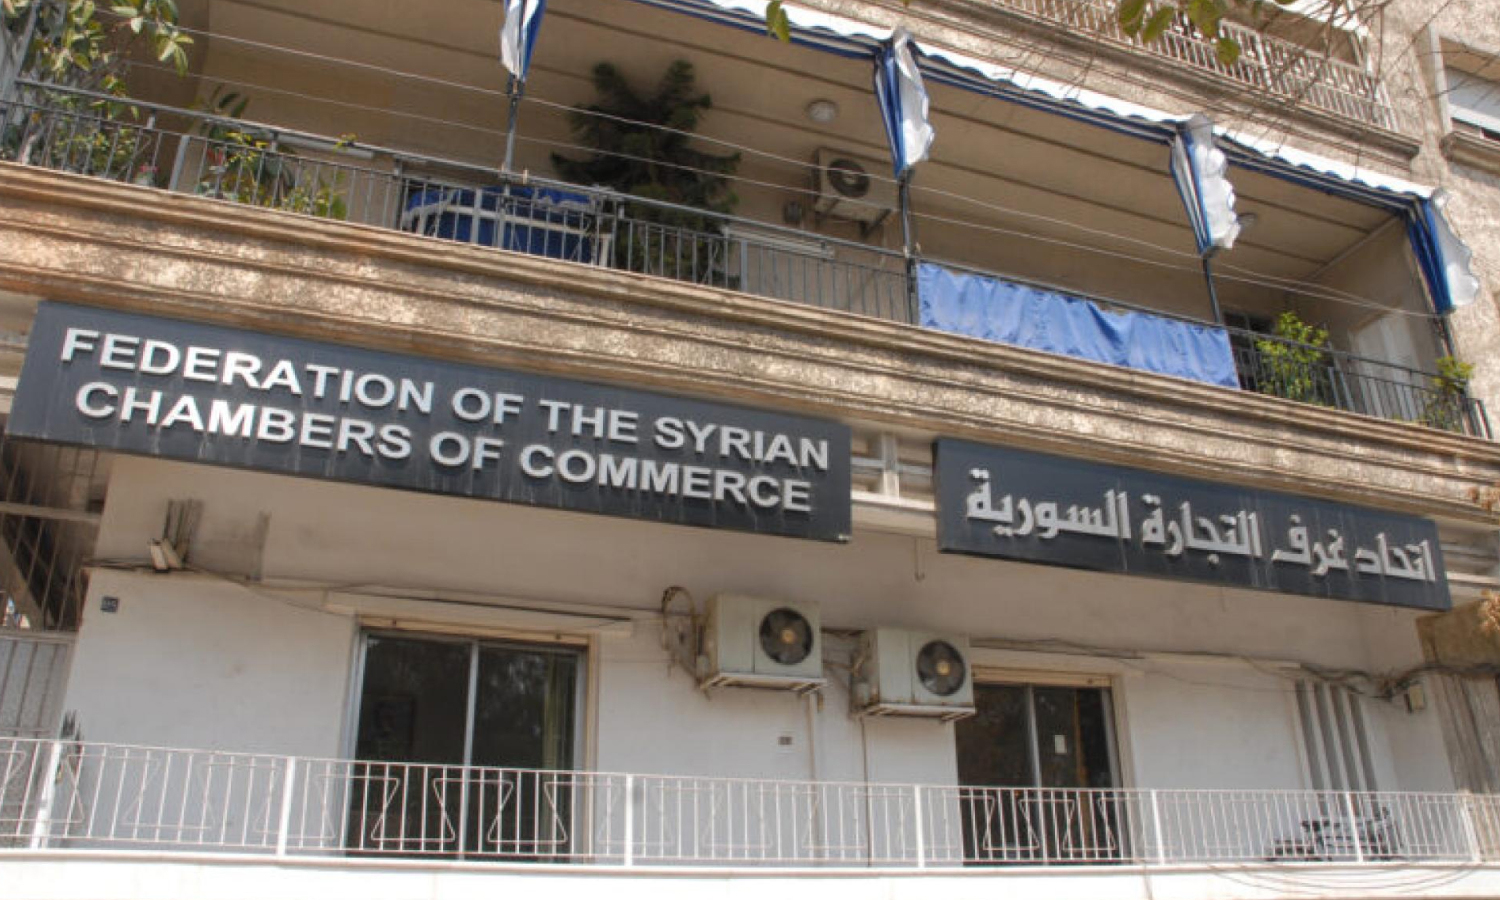 The Federation of Syrian Chambers of Commerce Federation of Syrian Chambers of Commerce (the Federation's official website)